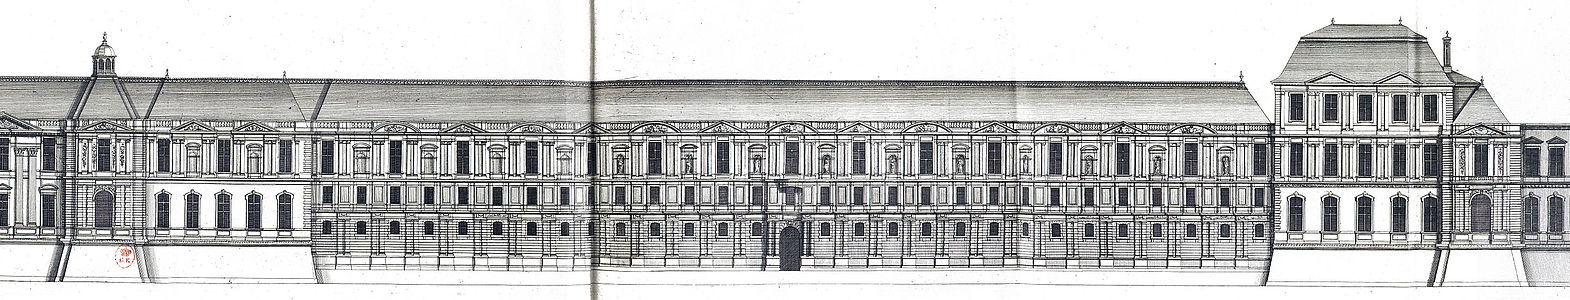 The eastern section of the Louvre's Grande Galerie, from an engraving by Jean Marot (c. 1670)